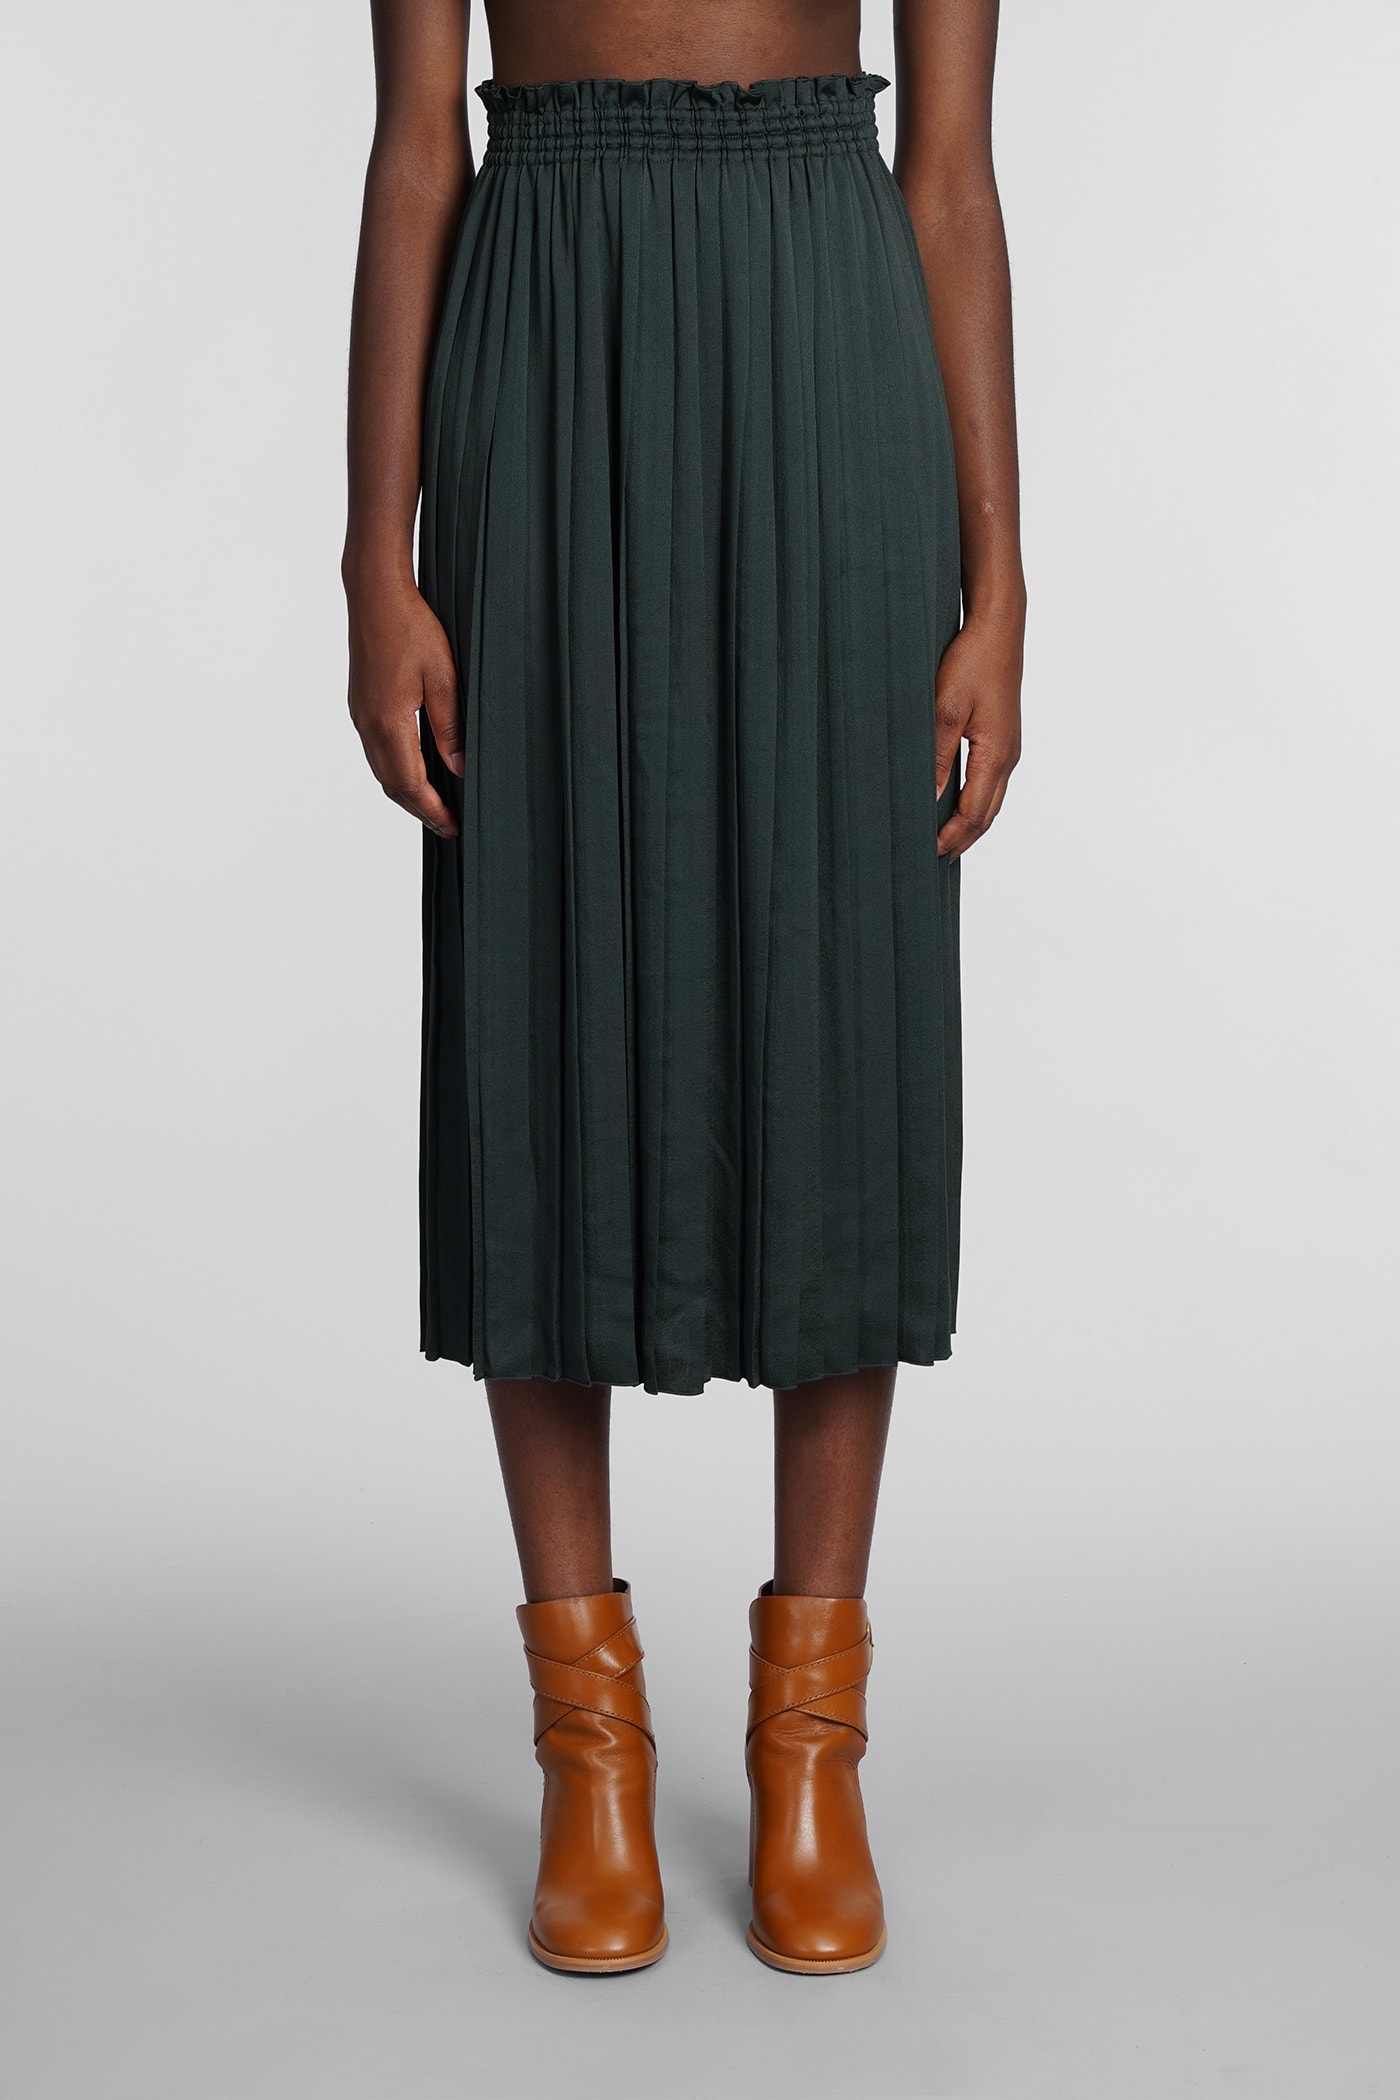 See by Chloé Skirt In Green Polyester